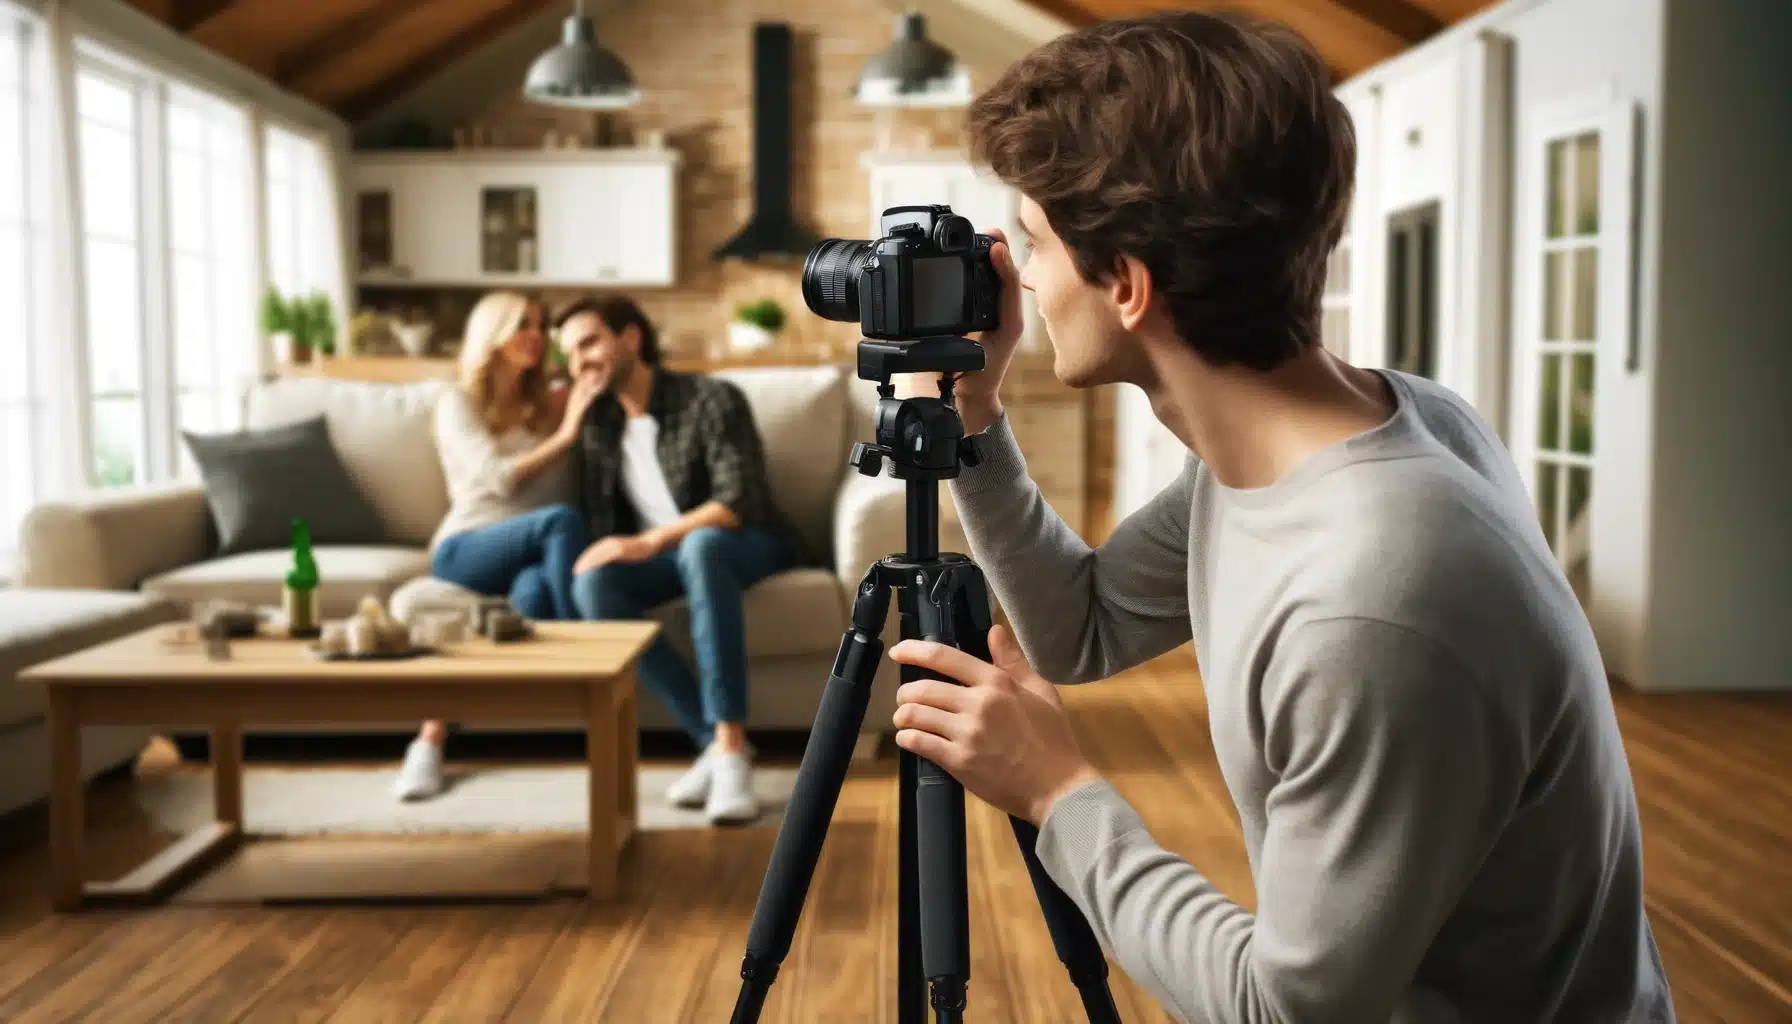 Photographer setting up a personal-depiction in a cozy home setting while two people in the background enjoy a lively conversation.